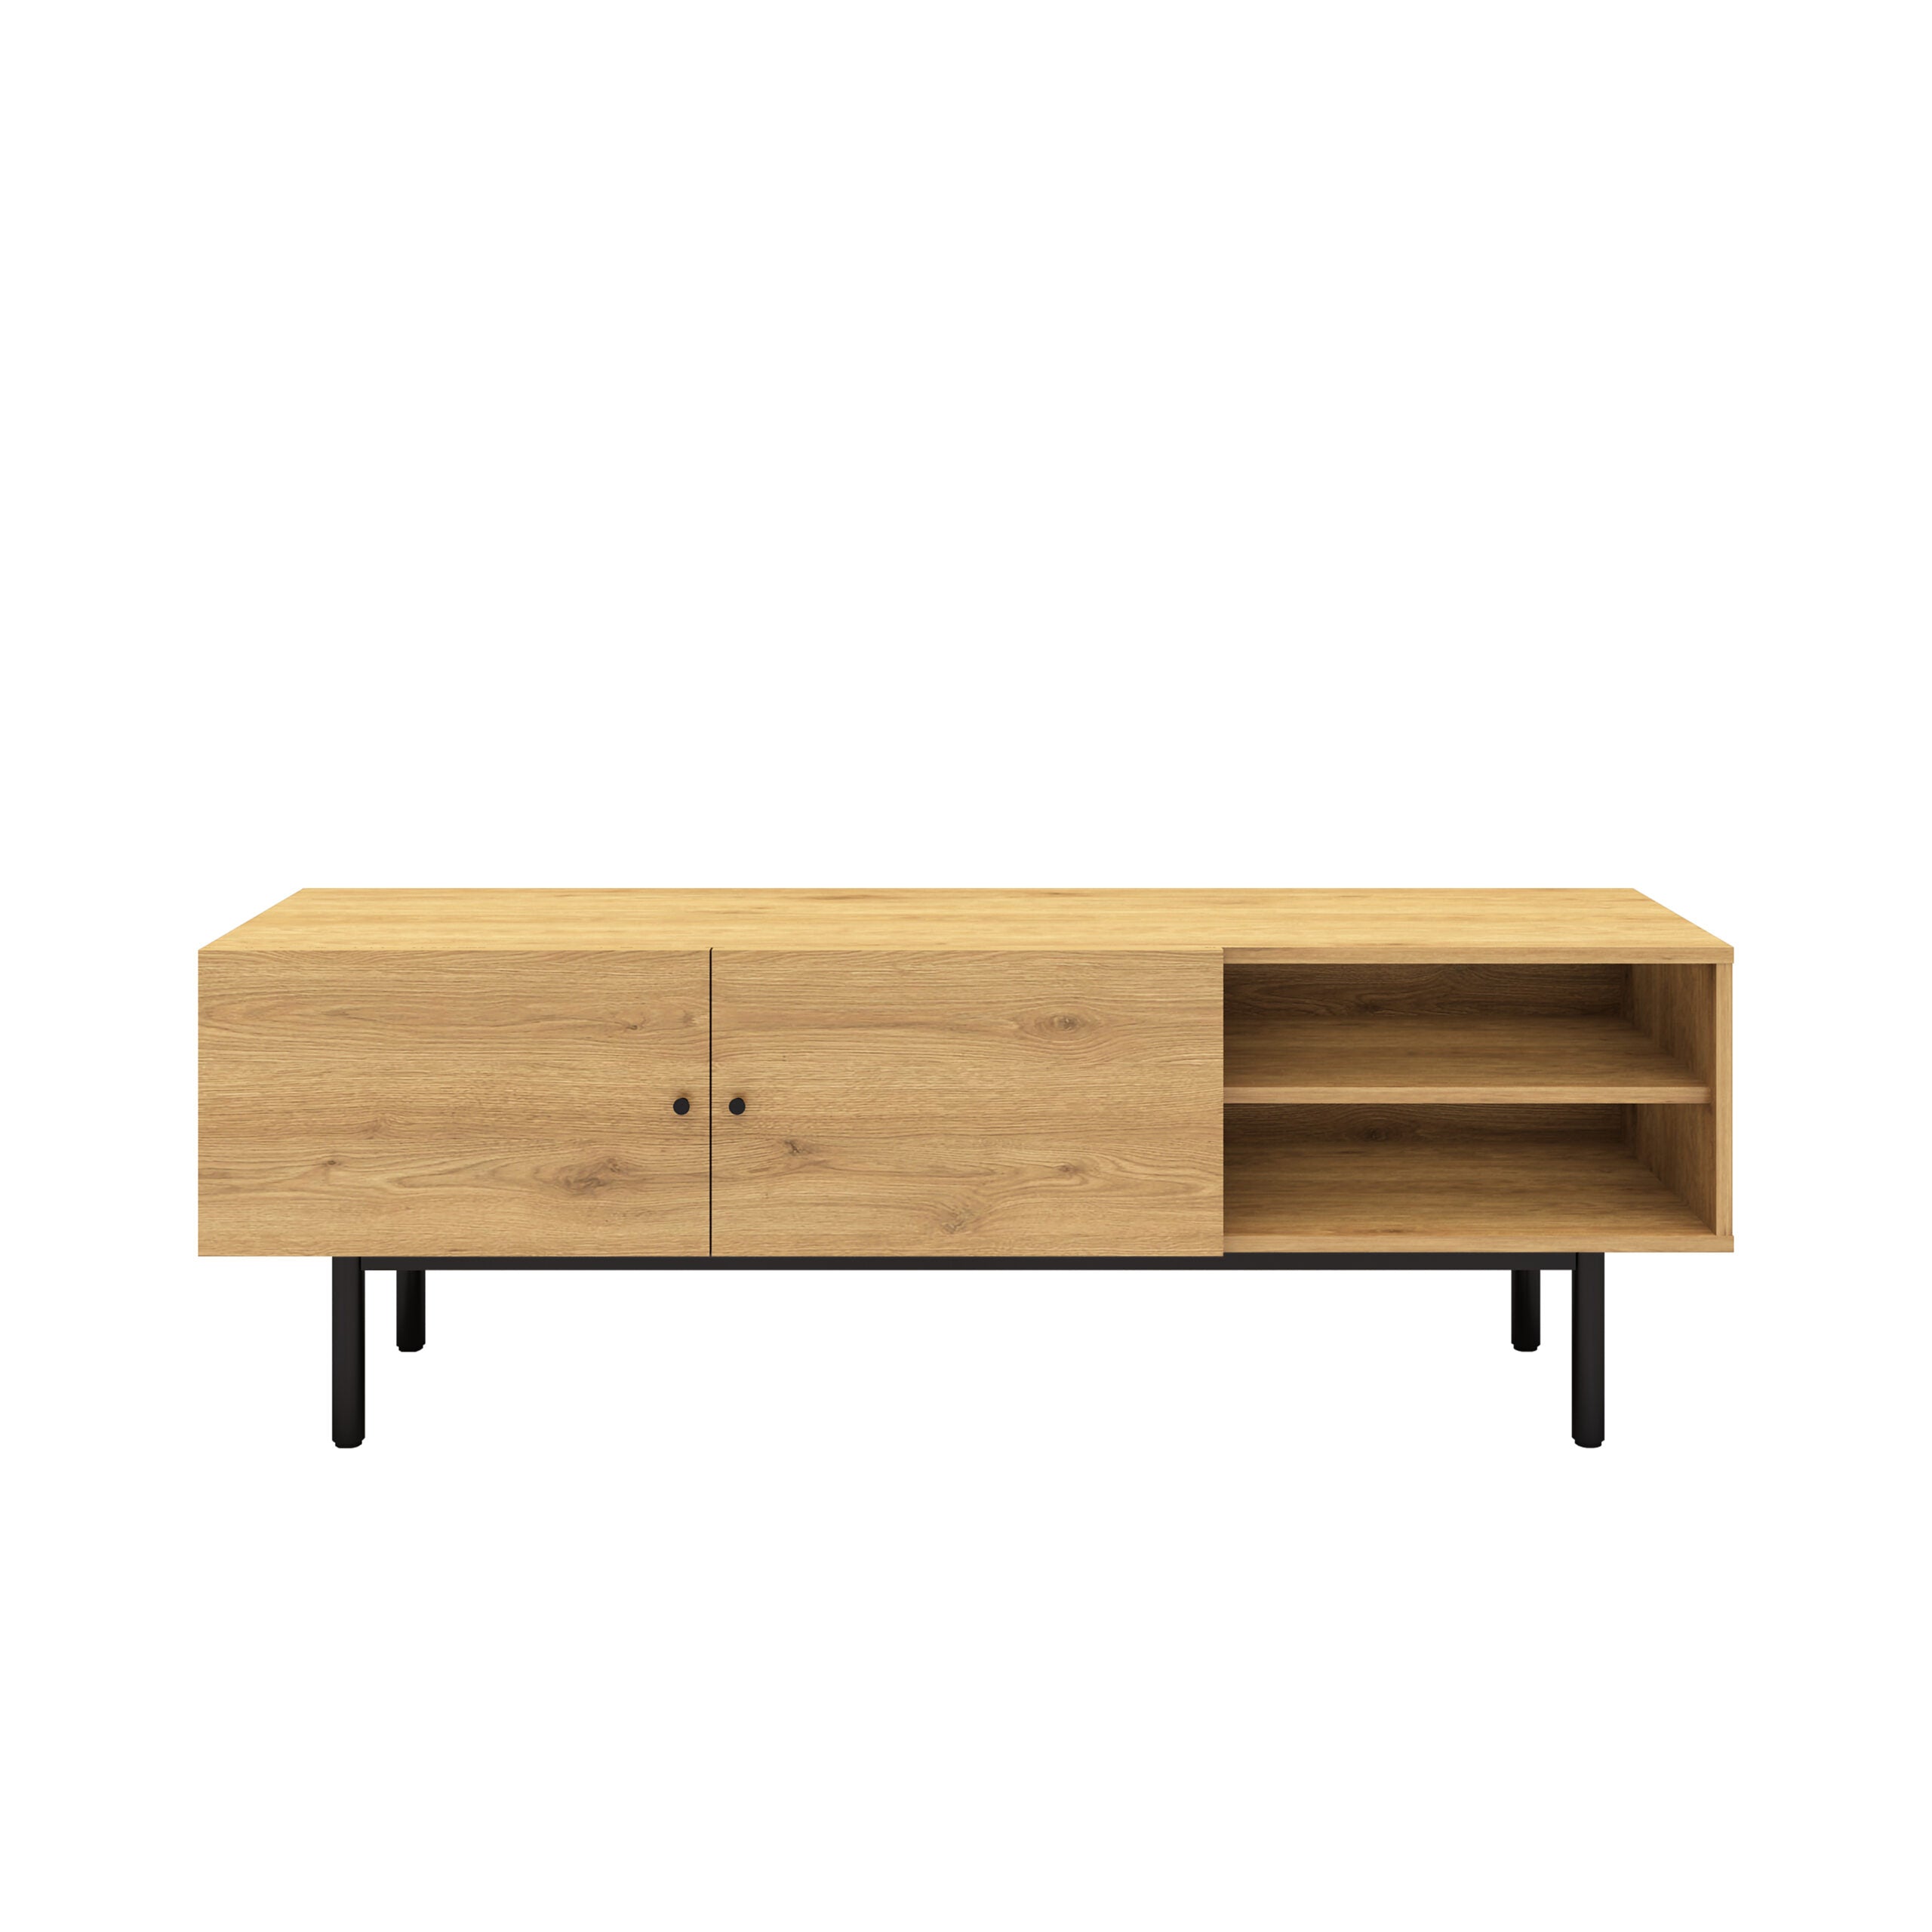 Lux Melamine Wood TV Unit With Metal Legs - Natural